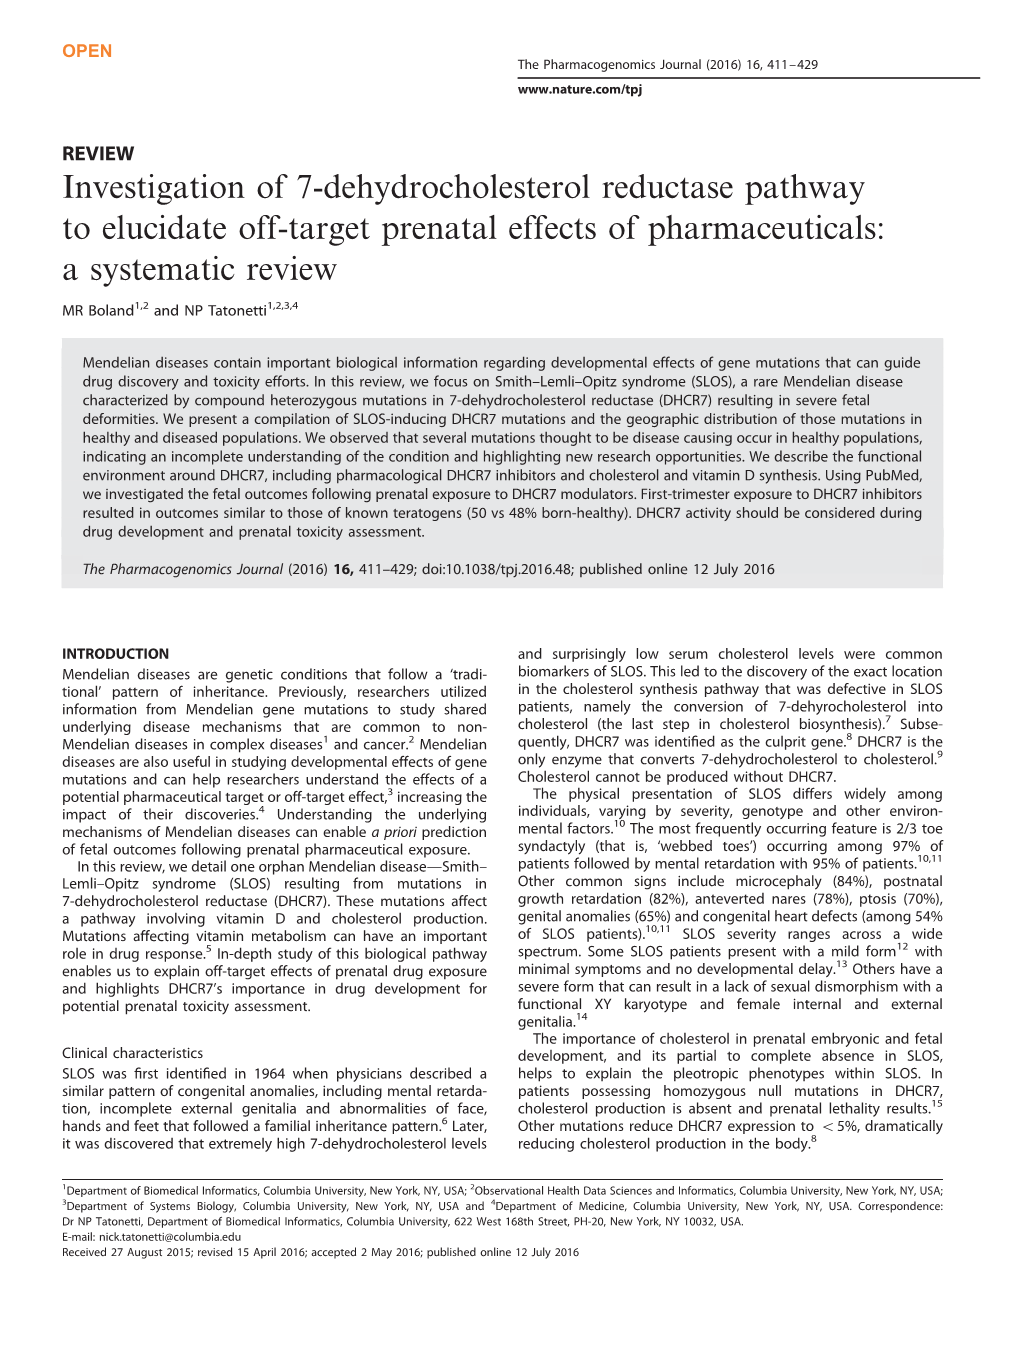 Investigation of 7-Dehydrocholesterol Reductase Pathway to Elucidate Off-Target Prenatal Effects of Pharmaceuticals: a Systematic Review